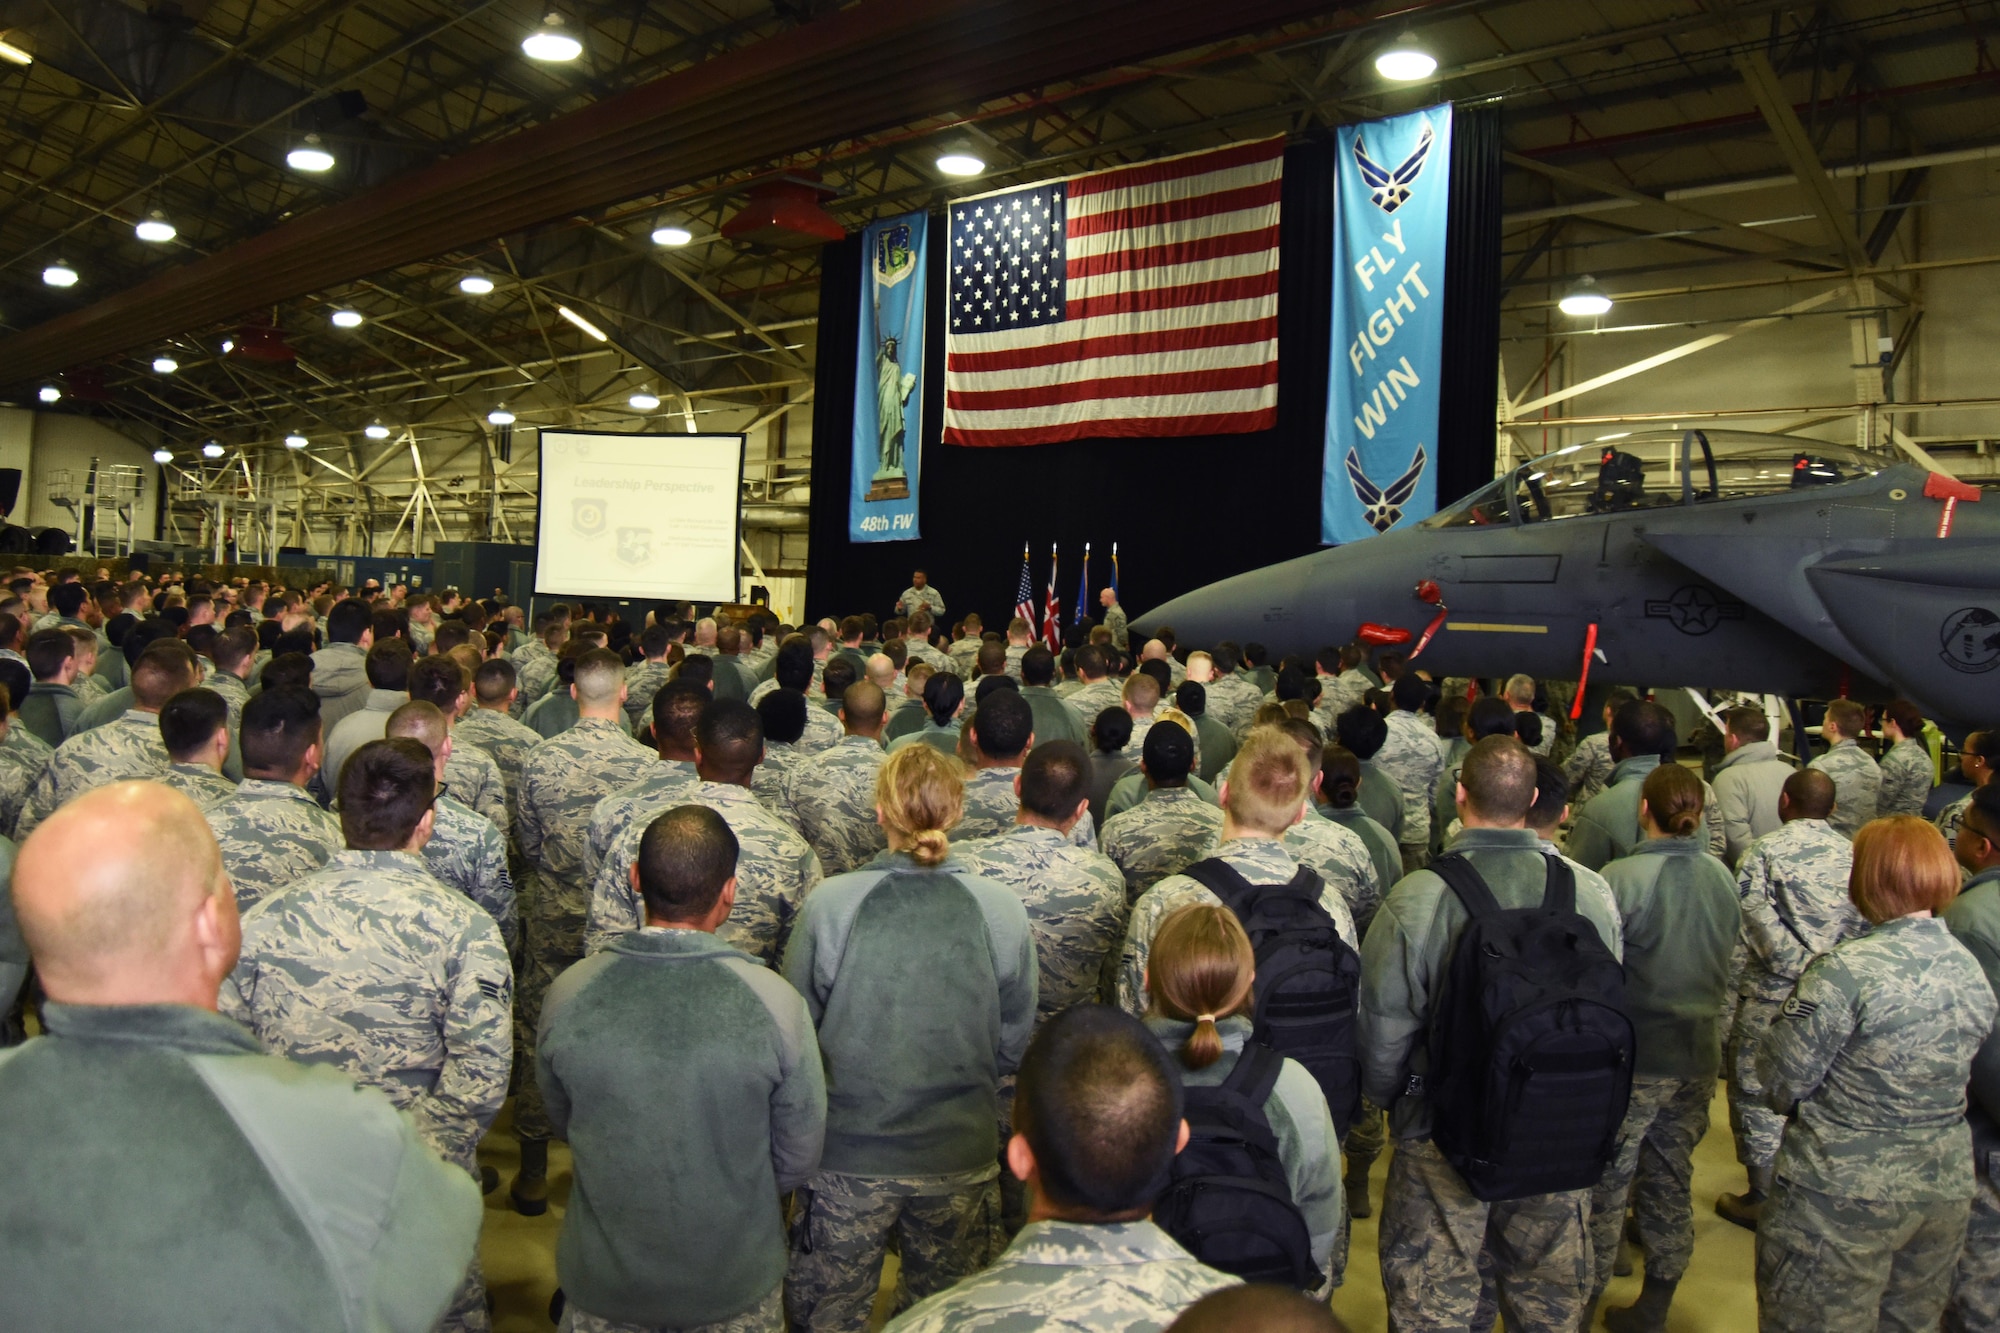 A crowd of Airmen from the 48th Fighter Wing listen to Lt. Gen. Richard M. Clark, 3rd Air Force Commander, speak during his presentation at Royal Air Force Lakenheath, England, Nov. 7. The general handed out various awards to outstanding Airmen for their contributions towards the mission. (U.S. Air Force photo/Airman 1st Class Christopher S. Sparks)